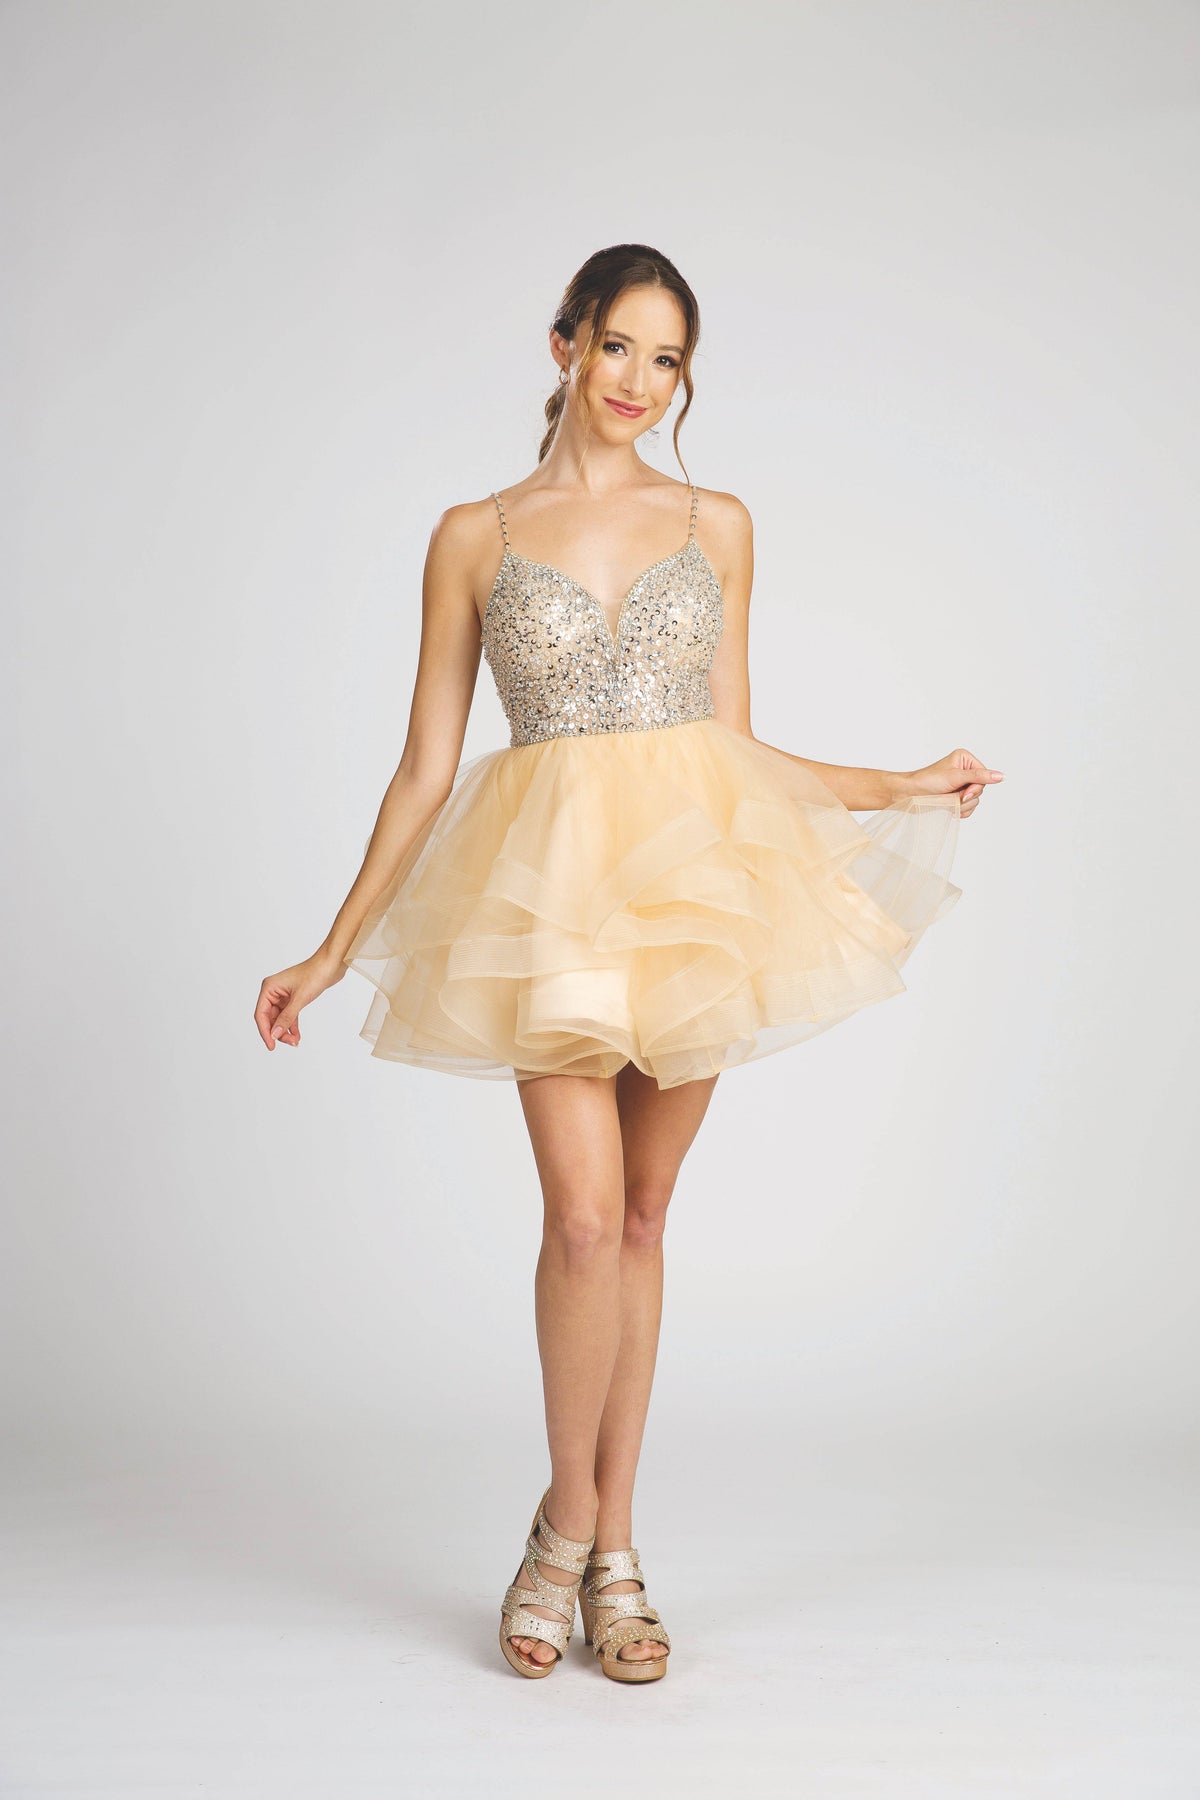 Fiesta 10253 Sparkling Sequin Damas Dress With Tulle Skirt - NORMA REED